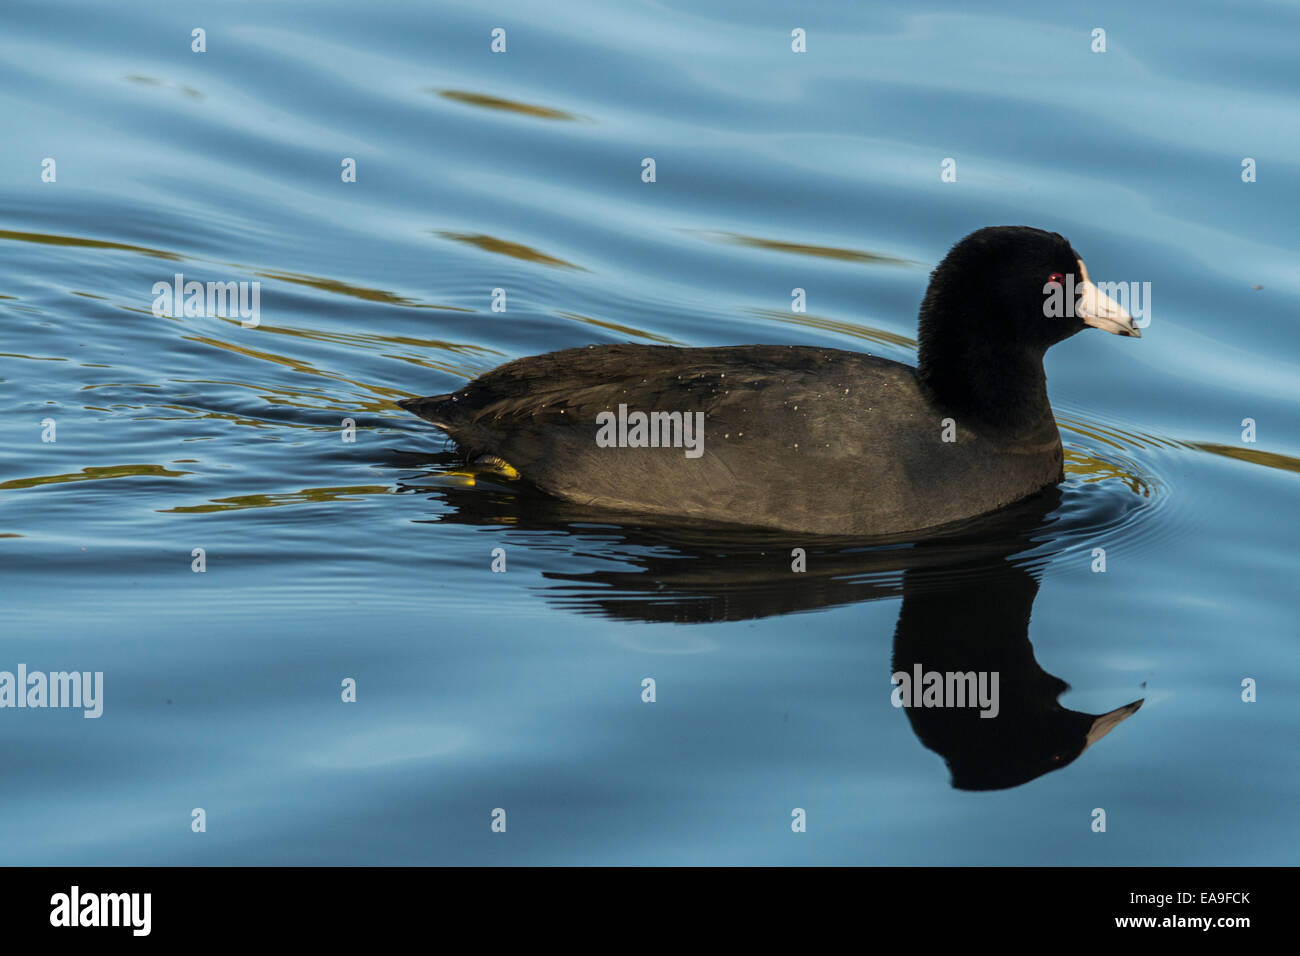 American Coot on blue water with a reflection. Stock Photo